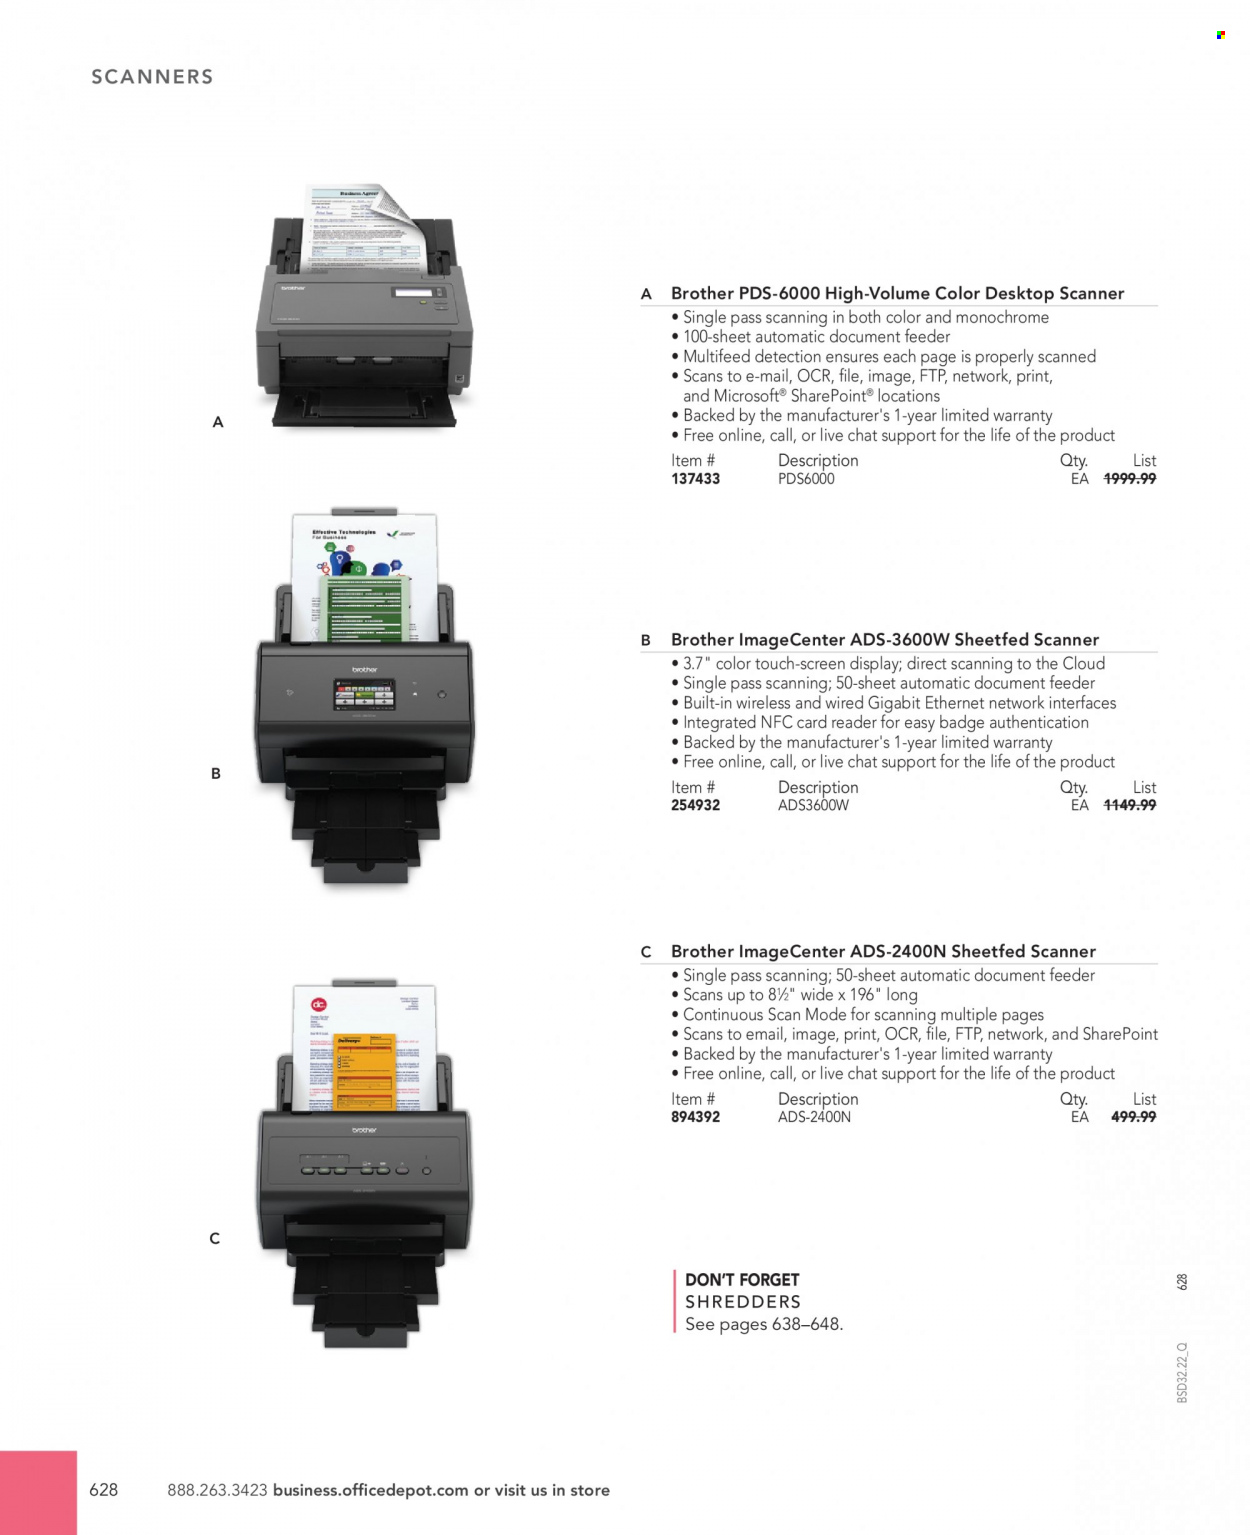 thumbnail - Office DEPOT Flyer - Sales products - Brother, scanner, shredder. Page 628.